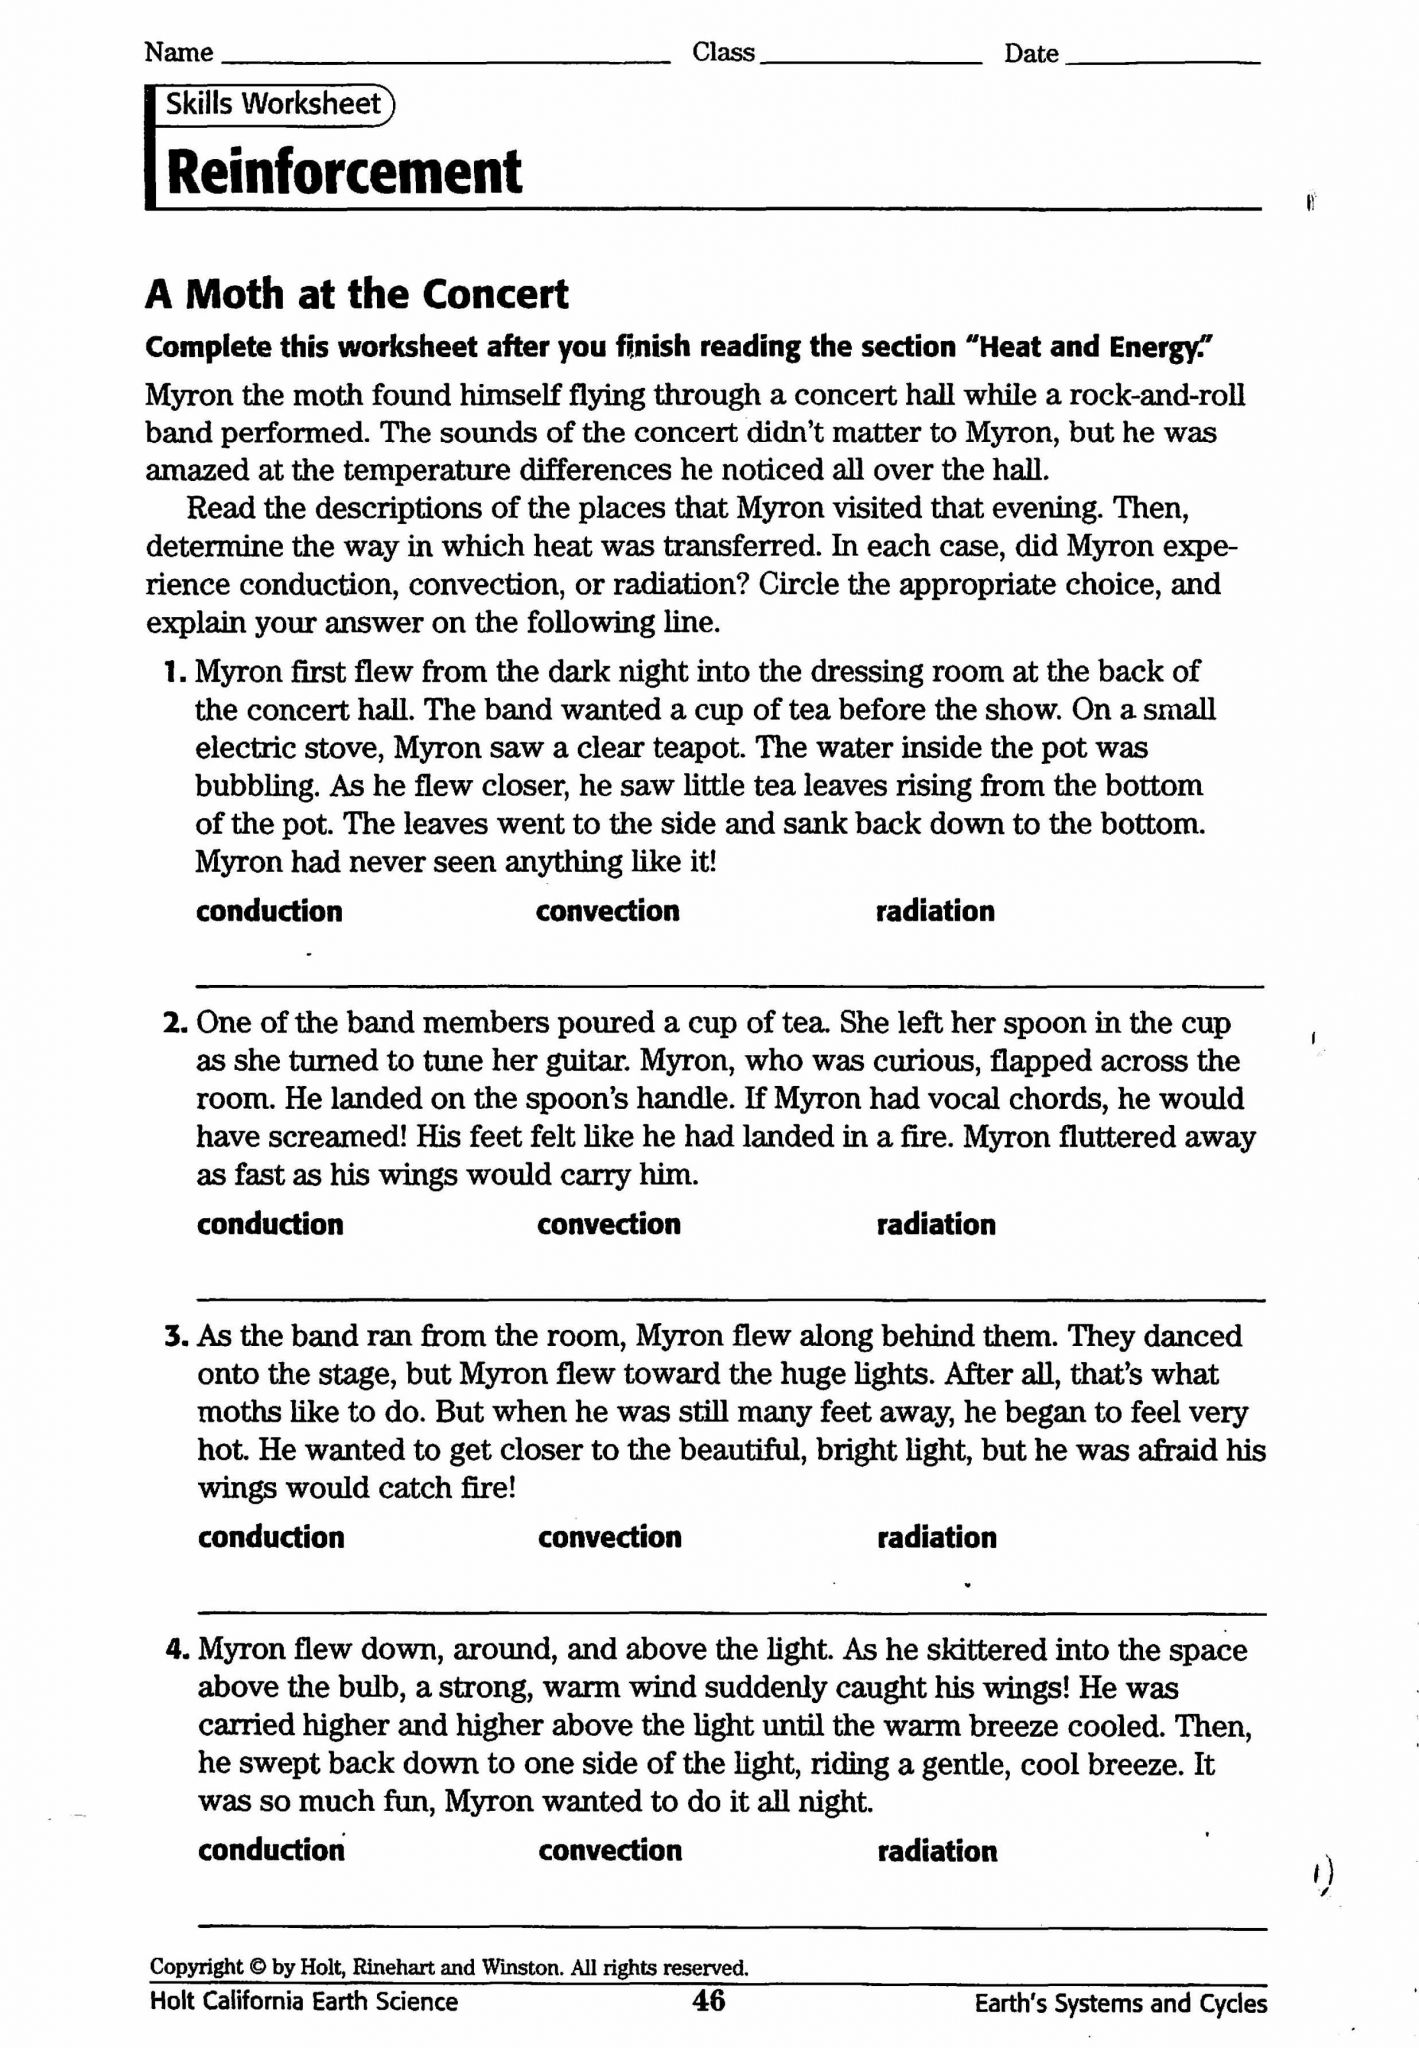 Business Cycle Worksheet Answer Key together with Worksheet Methods Heat Transfer Worksheet Answers Review